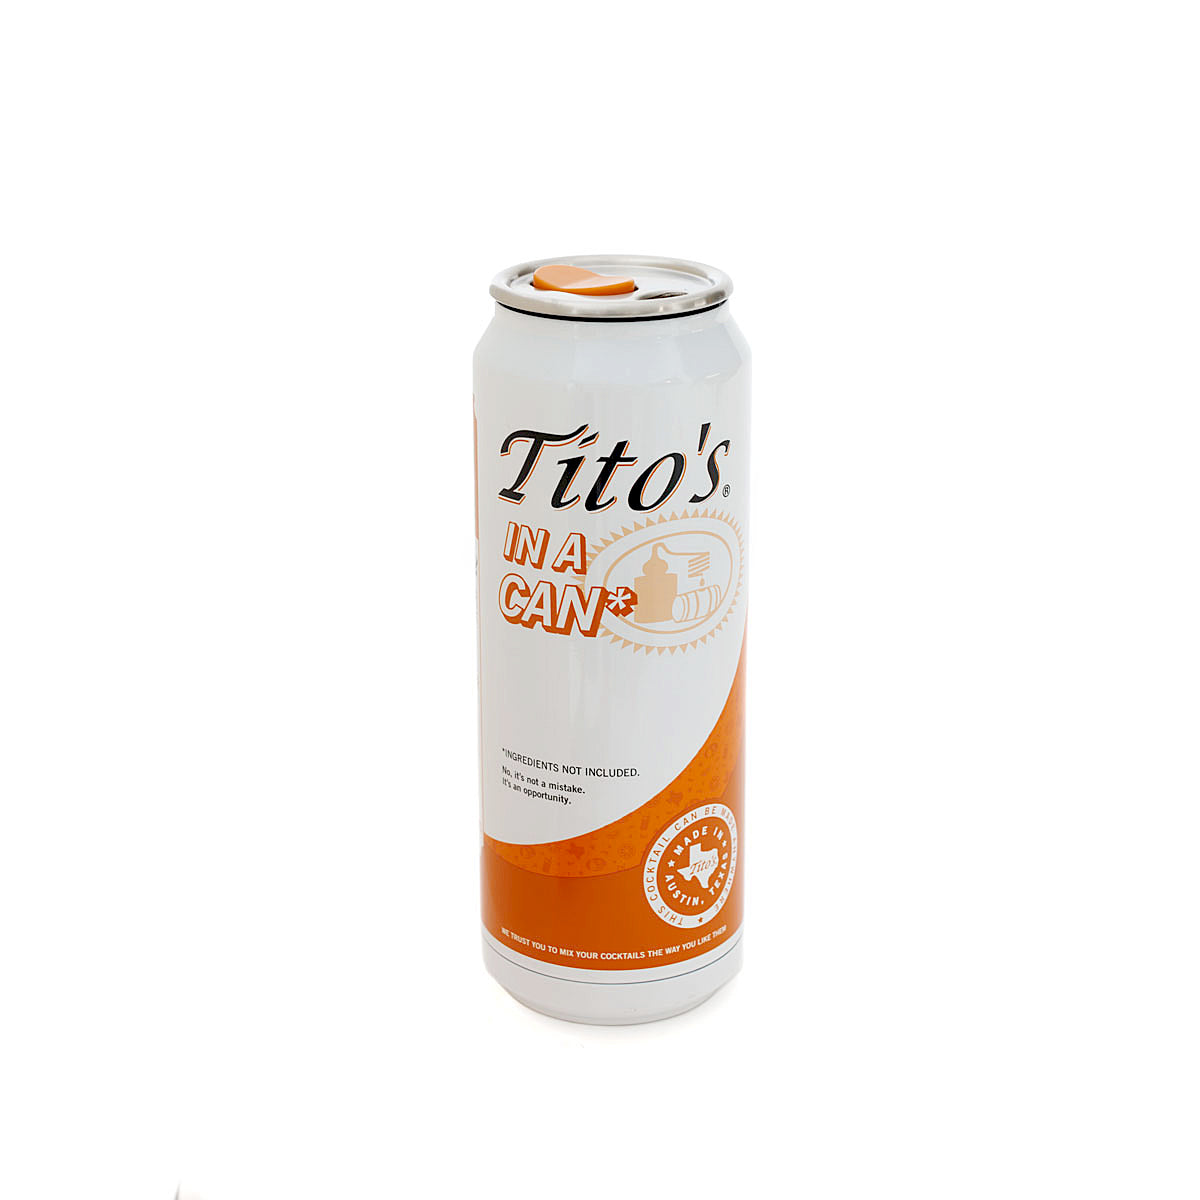 Orange and white stainless steel can tumbler with Tito's in a Can* wordmark. potstill emblem, and removable lid